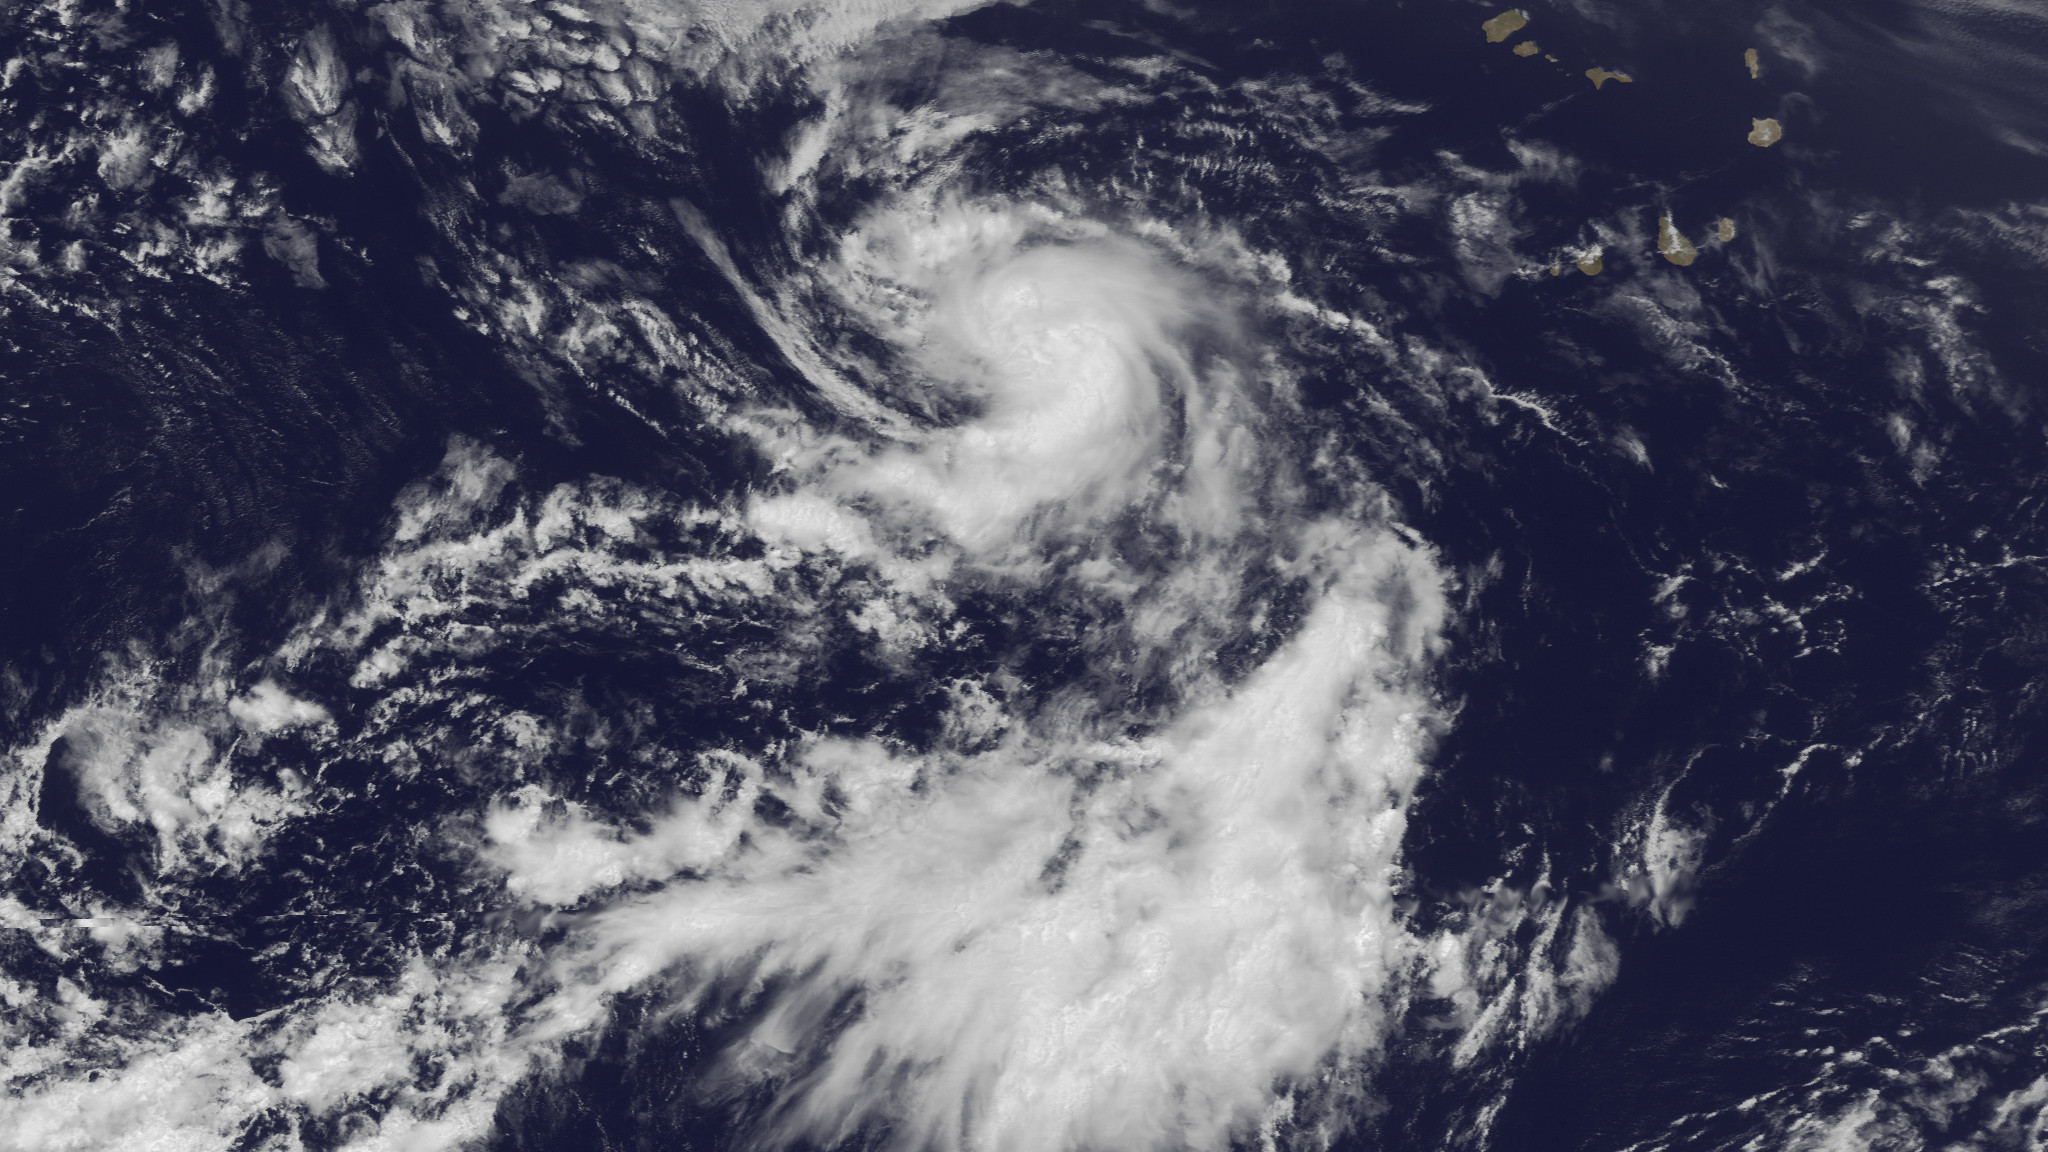 2048x1152 Image of Tropical Storm Dorian on July 24, 2013, from NOAA's GOES East  satellite